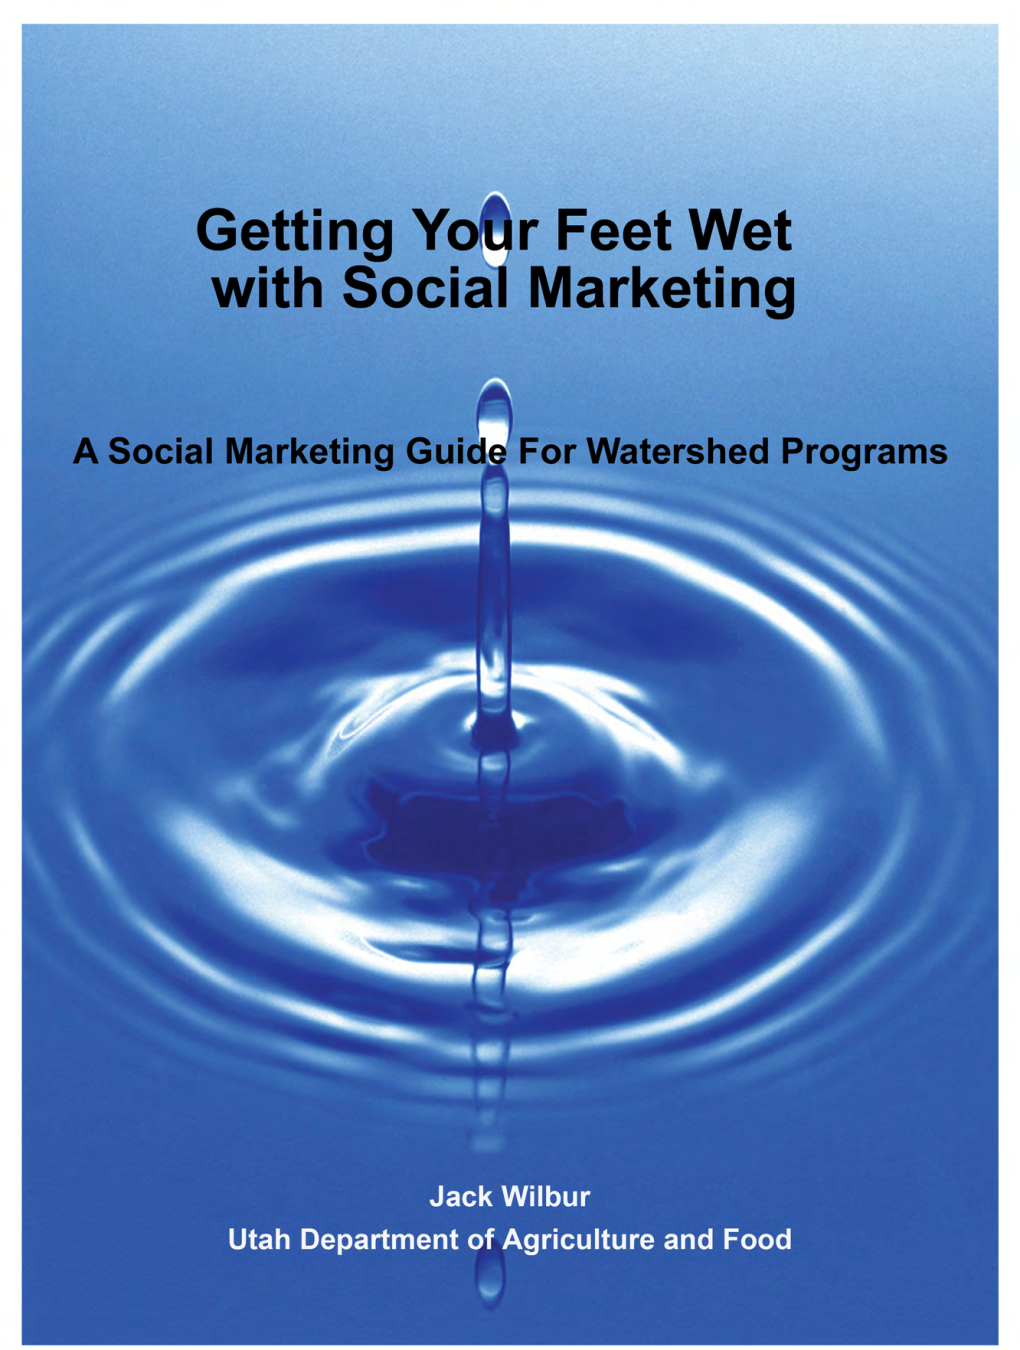 Getting Your Feet Wet with Social Marketing